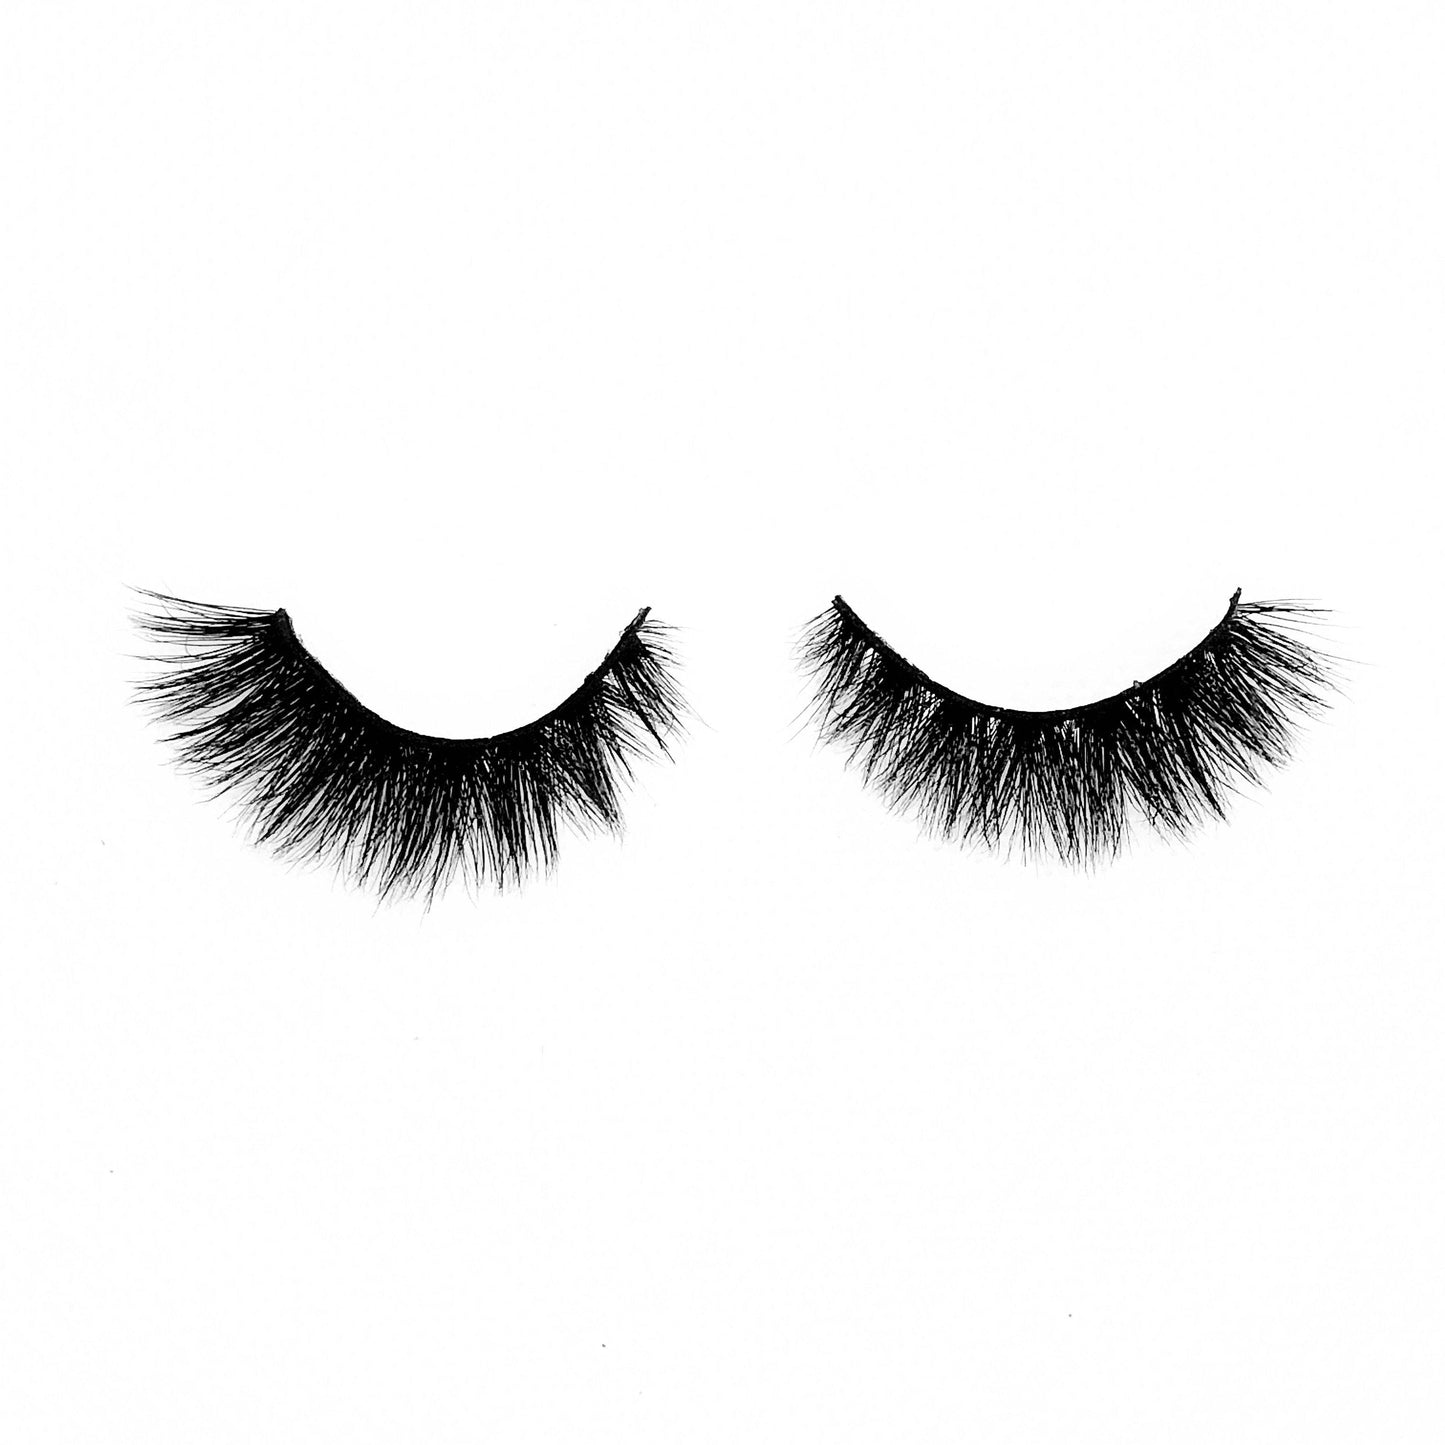 Amour-High Volume-"Amour" is the perfect short length and volume combo for full, fluffy, and flirty 5D mink lashes. Super lightweight, comfortable, and versatile for any occasion. With a slightly shorter inner corner to mimic your natural lashes, they add the perfect glam to your look without being too extra. Try our "Finesser" lashes for a longer look! Description Handmade, Cruelty-Free, Wear up to 30x Material: 100% Mink Band: Black Cotton Band Volume: High Style: Short, Flirty, Cat-eye, Drama